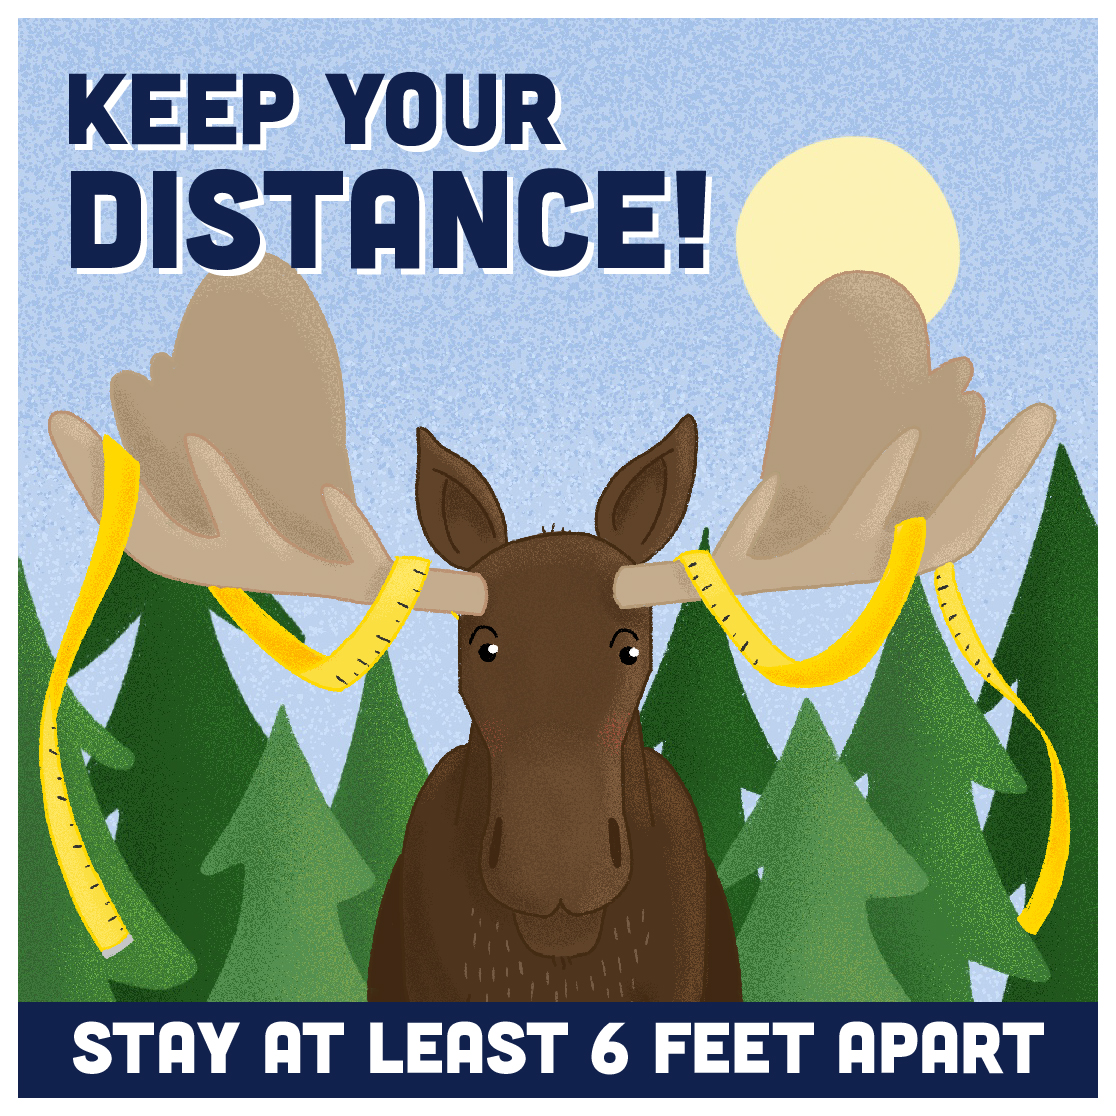 Keep your distance! Stay at least 6 feet apart